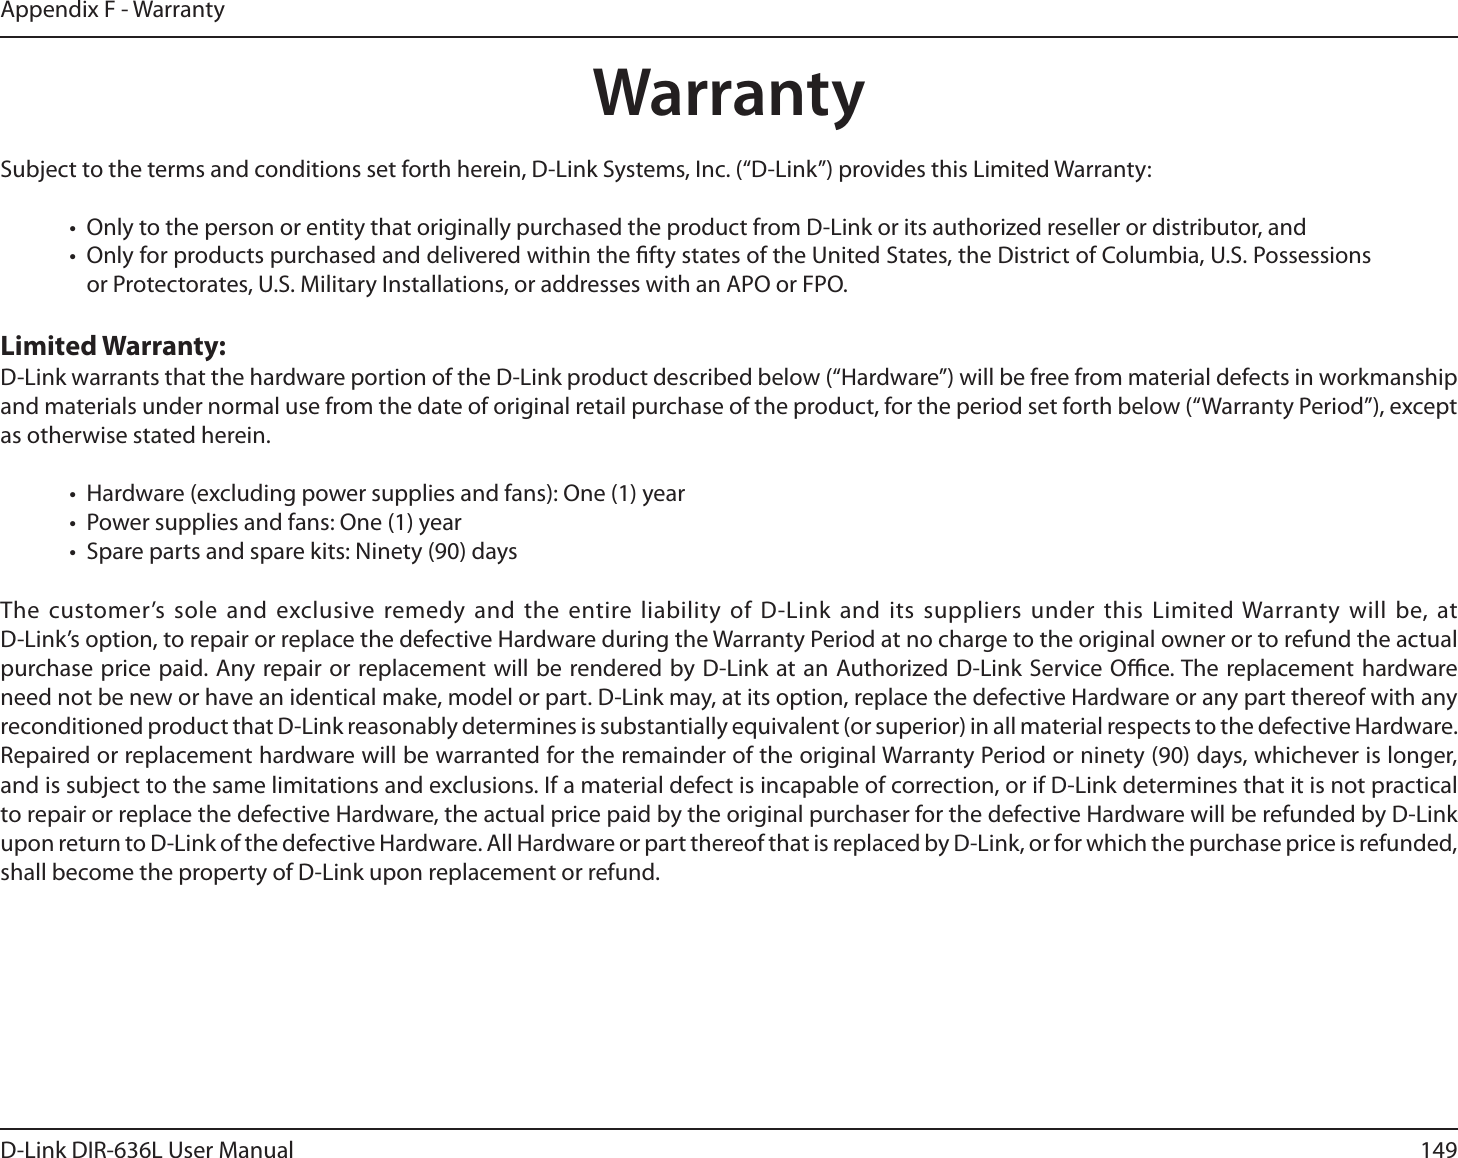 149D-Link DIR-636L User ManualAppendix F - WarrantyWarrantySubject to the terms and conditions set forth herein, D-Link Systems, Inc. (“D-Link”) provides this Limited Warranty:•  Only to the person or entity that originally purchased the product from D-Link or its authorized reseller or distributor, and•  Only for products purchased and delivered within the fty states of the United States, the District of Columbia, U.S. Possessions or Protectorates, U.S. Military Installations, or addresses with an APO or FPO.Limited Warranty:D-Link warrants that the hardware portion of the D-Link product described below (“Hardware”) will be free from material defects in workmanship and materials under normal use from the date of original retail purchase of the product, for the period set forth below (“Warranty Period”), except as otherwise stated herein.•  Hardware (excluding power supplies and fans): One (1) year•  Power supplies and fans: One (1) year•  Spare parts and spare kits: Ninety (90) daysThe customer’s sole and exclusive remedy and the entire liability of D-Link and its suppliers under this Limited Warranty will be, at  D-Link’s option, to repair or replace the defective Hardware during the Warranty Period at no charge to the original owner or to refund the actual purchase price paid. Any repair or replacement will be rendered by D-Link at an Authorized D-Link Service Oce. The replacement hardware need not be new or have an identical make, model or part. D-Link may, at its option, replace the defective Hardware or any part thereof with any reconditioned product that D-Link reasonably determines is substantially equivalent (or superior) in all material respects to the defective Hardware. Repaired or replacement hardware will be warranted for the remainder of the original Warranty Period or ninety (90) days, whichever is longer, and is subject to the same limitations and exclusions. If a material defect is incapable of correction, or if D-Link determines that it is not practical to repair or replace the defective Hardware, the actual price paid by the original purchaser for the defective Hardware will be refunded by D-Link upon return to D-Link of the defective Hardware. All Hardware or part thereof that is replaced by D-Link, or for which the purchase price is refunded, shall become the property of D-Link upon replacement or refund.